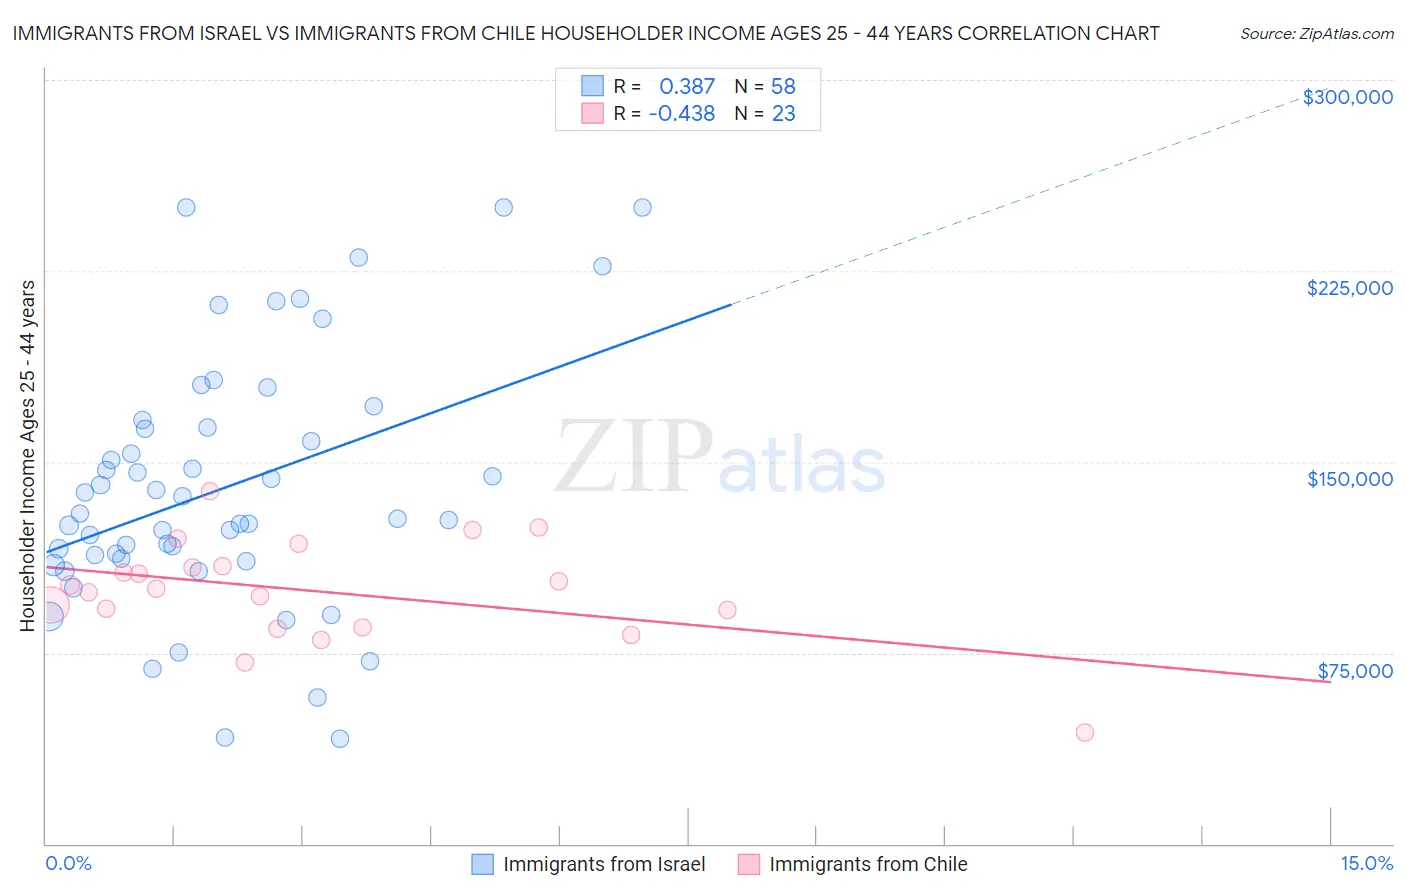 Immigrants from Israel vs Immigrants from Chile Householder Income Ages 25 - 44 years